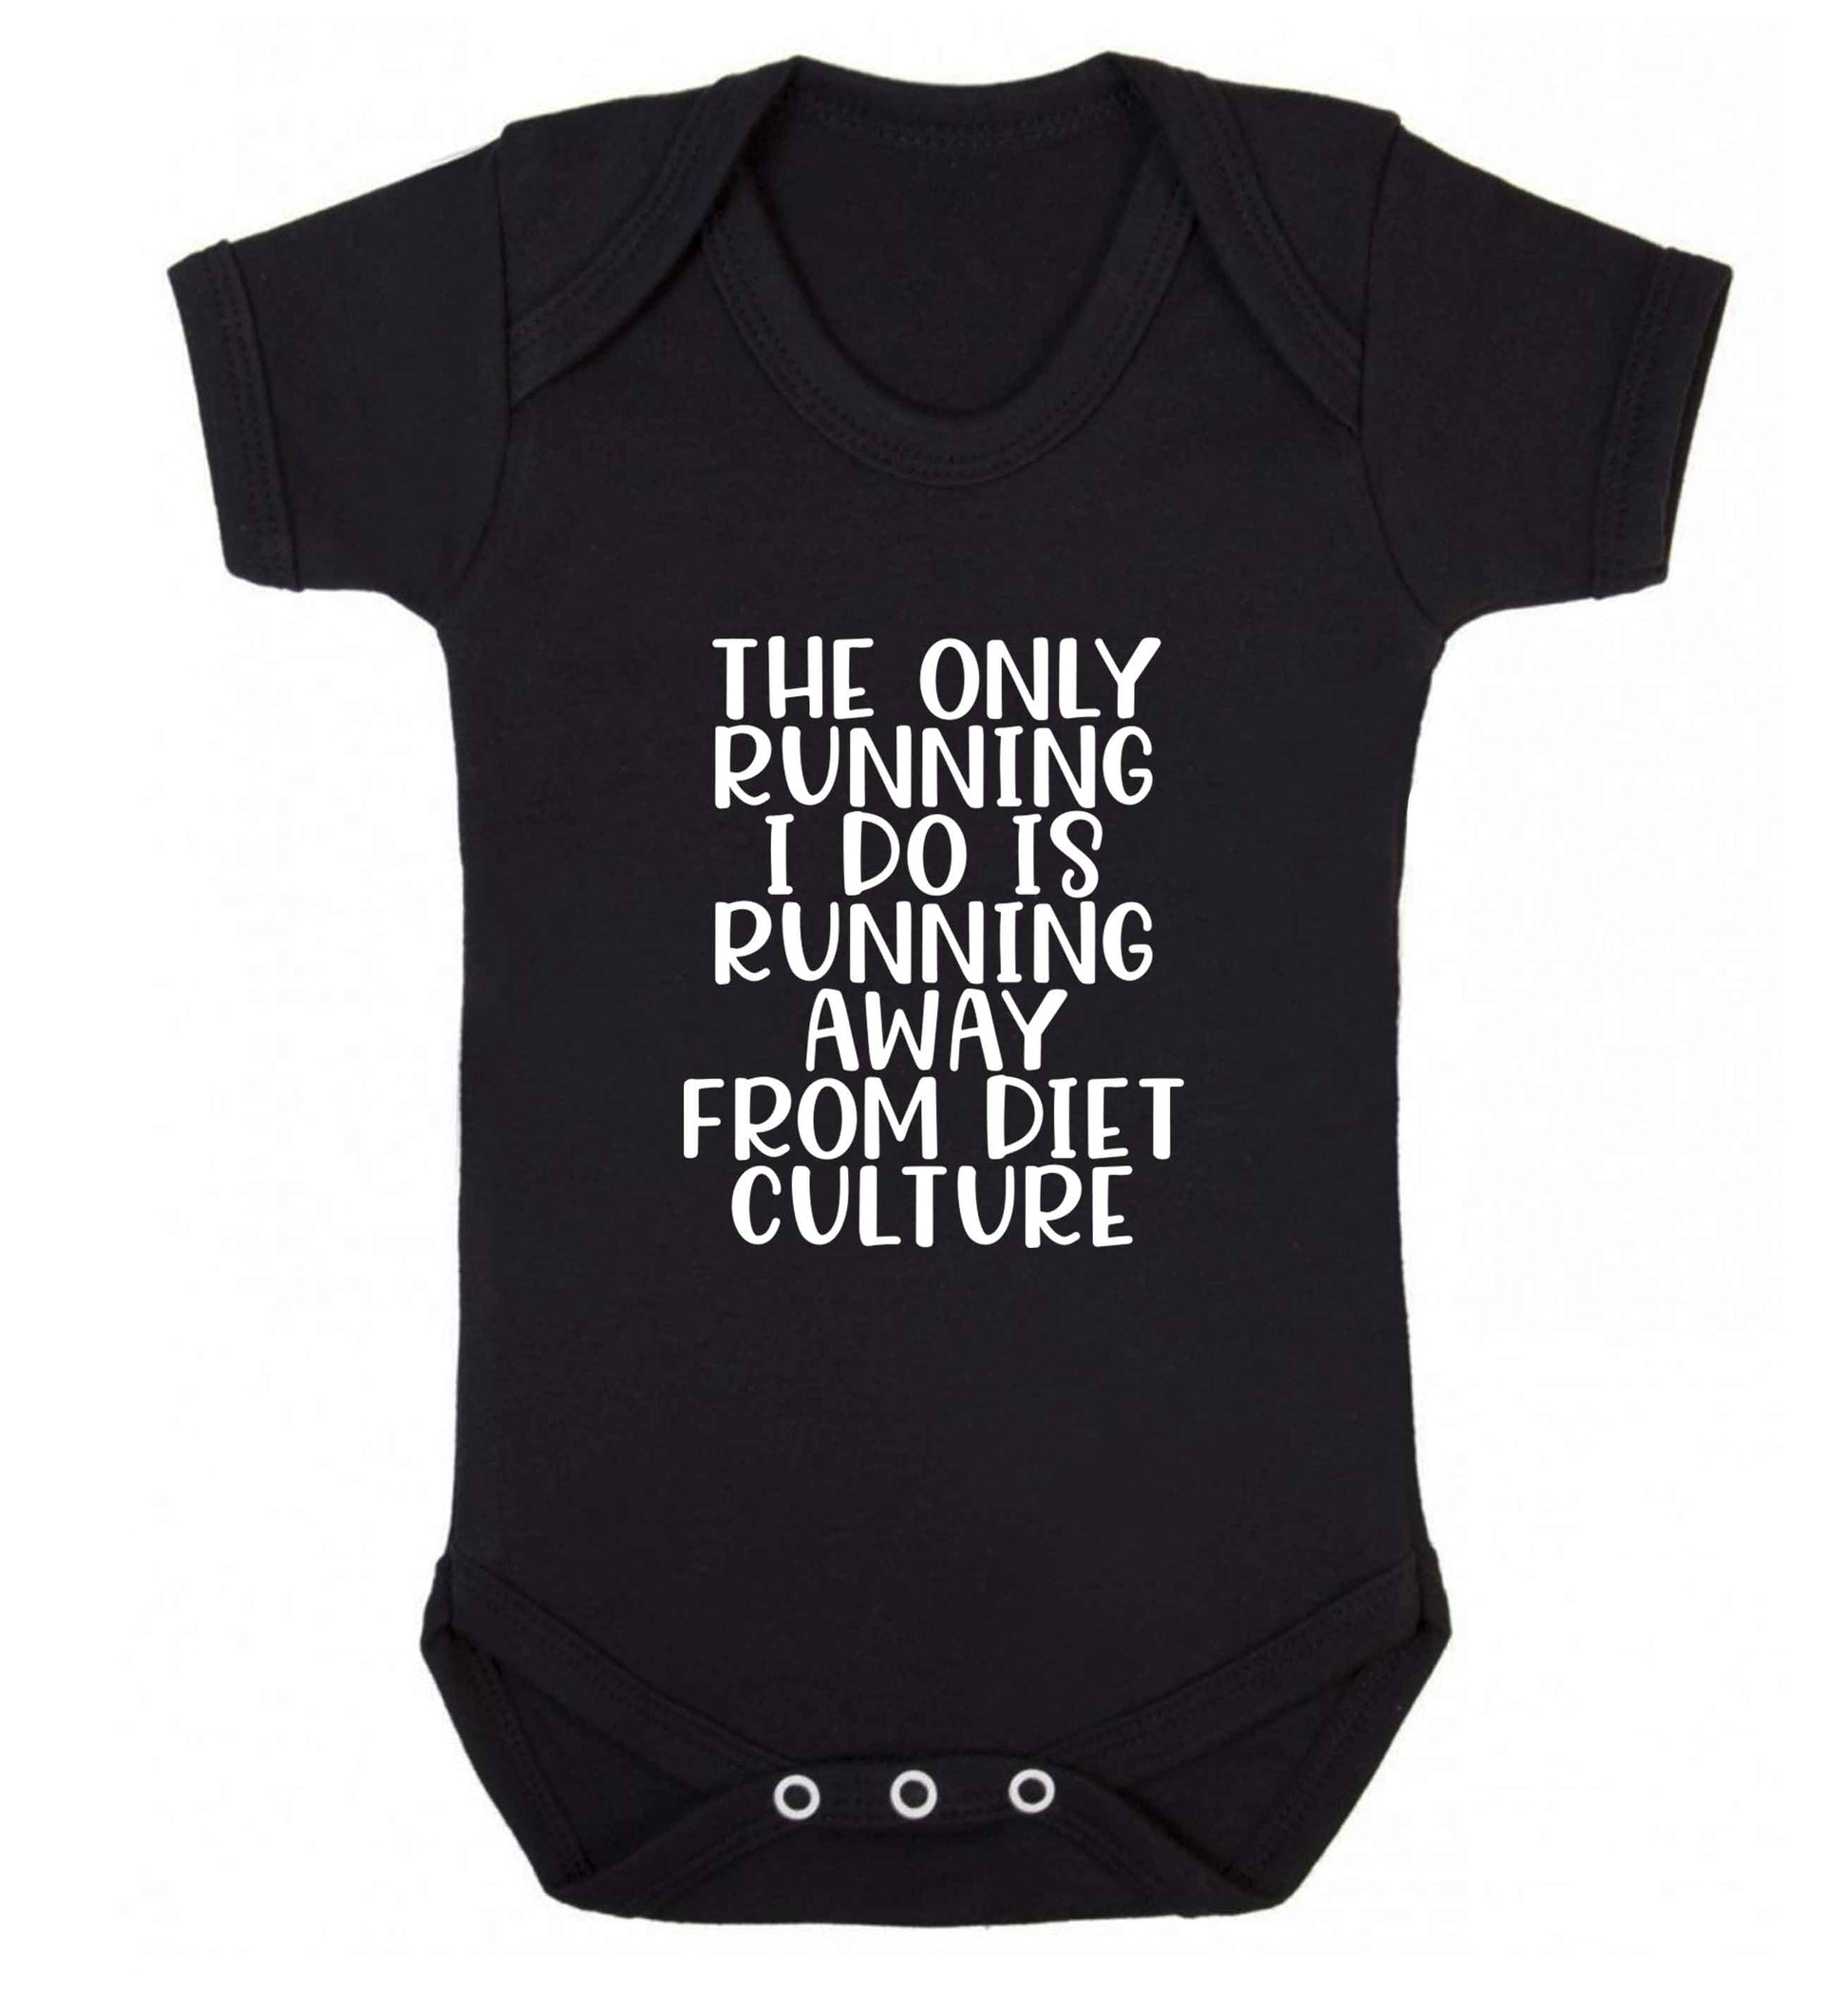 The only running I do is running away from diet culture baby vest black 18-24 months